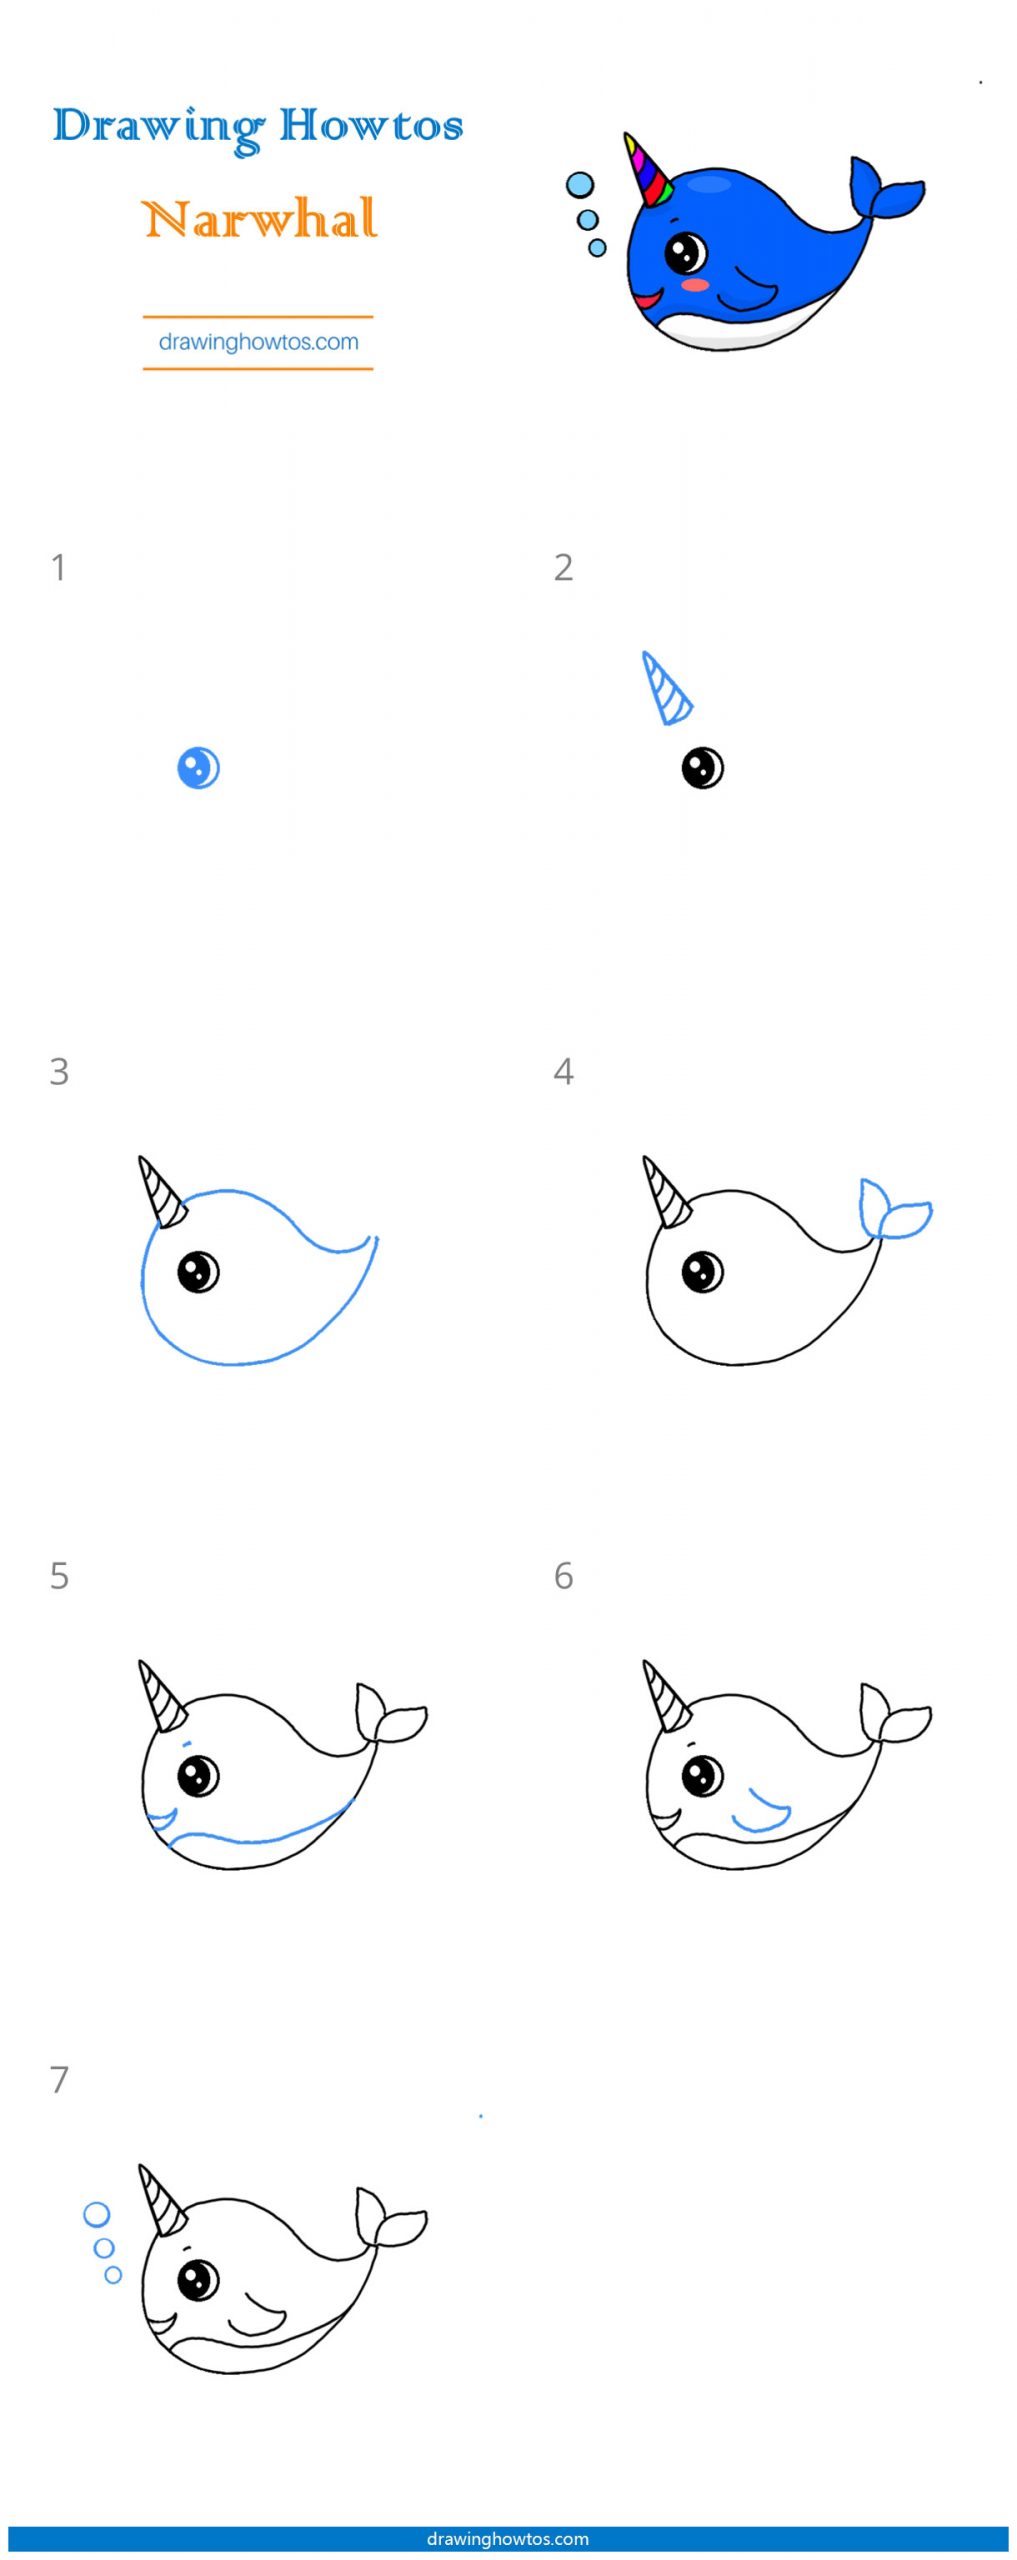 How to Draw a Narwhal Step by Step